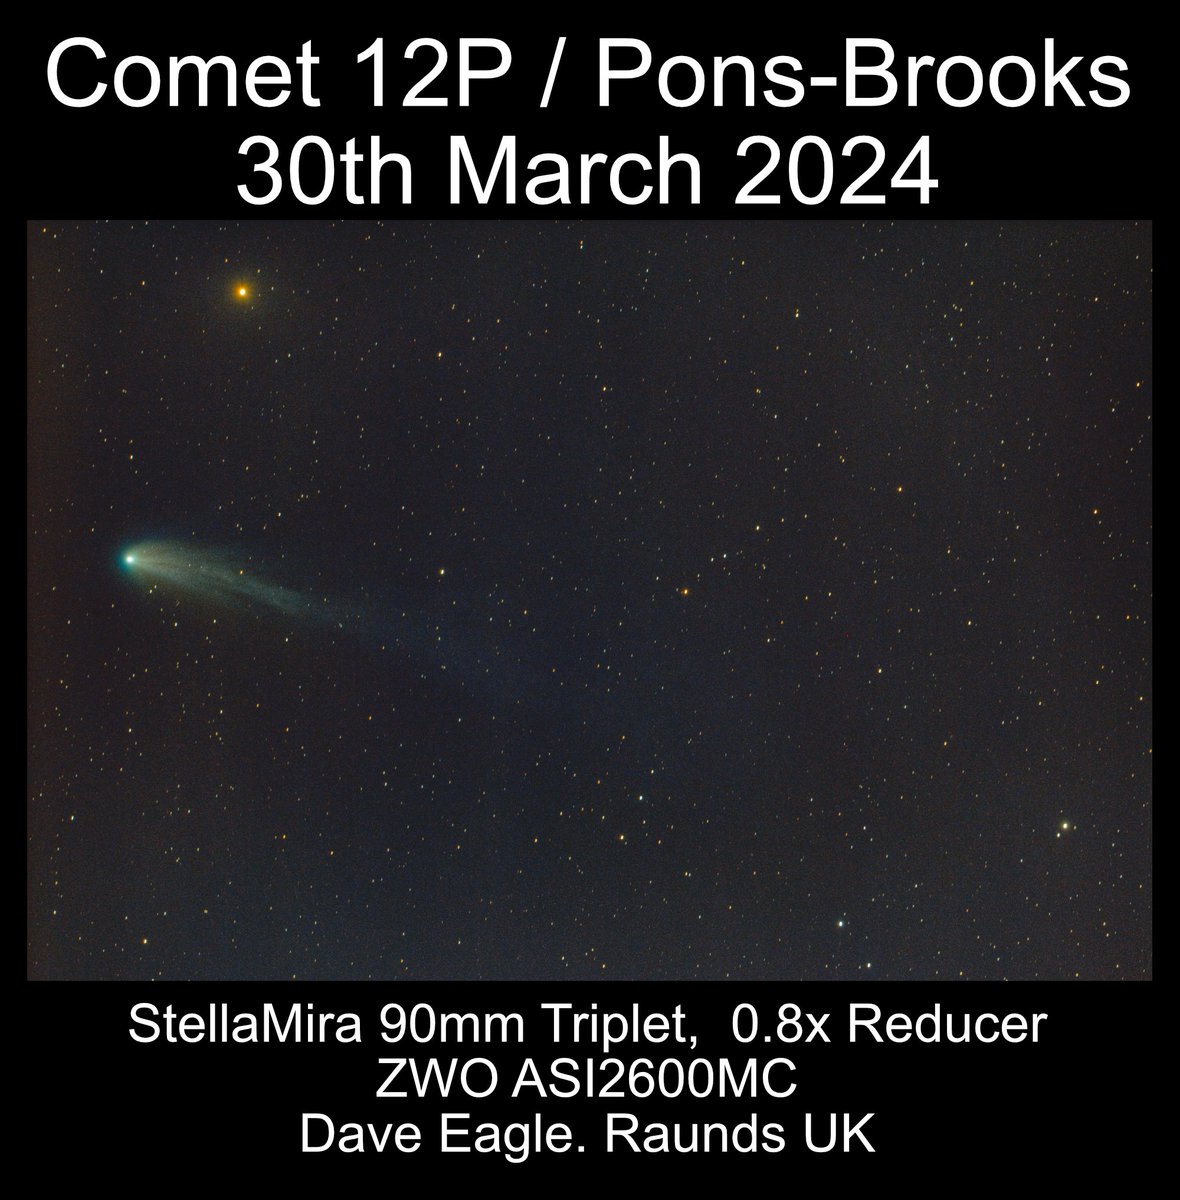 This evening's Comet 12P / Pons-Brooks. Had to go out in the wilds to get a decent low horizon, but interfering clouds only allowed me to catch a few sub-exposures of it close to the 2nd magnitude star Hamal in Aries. This is a very nice comet, but now getting a real challenge.